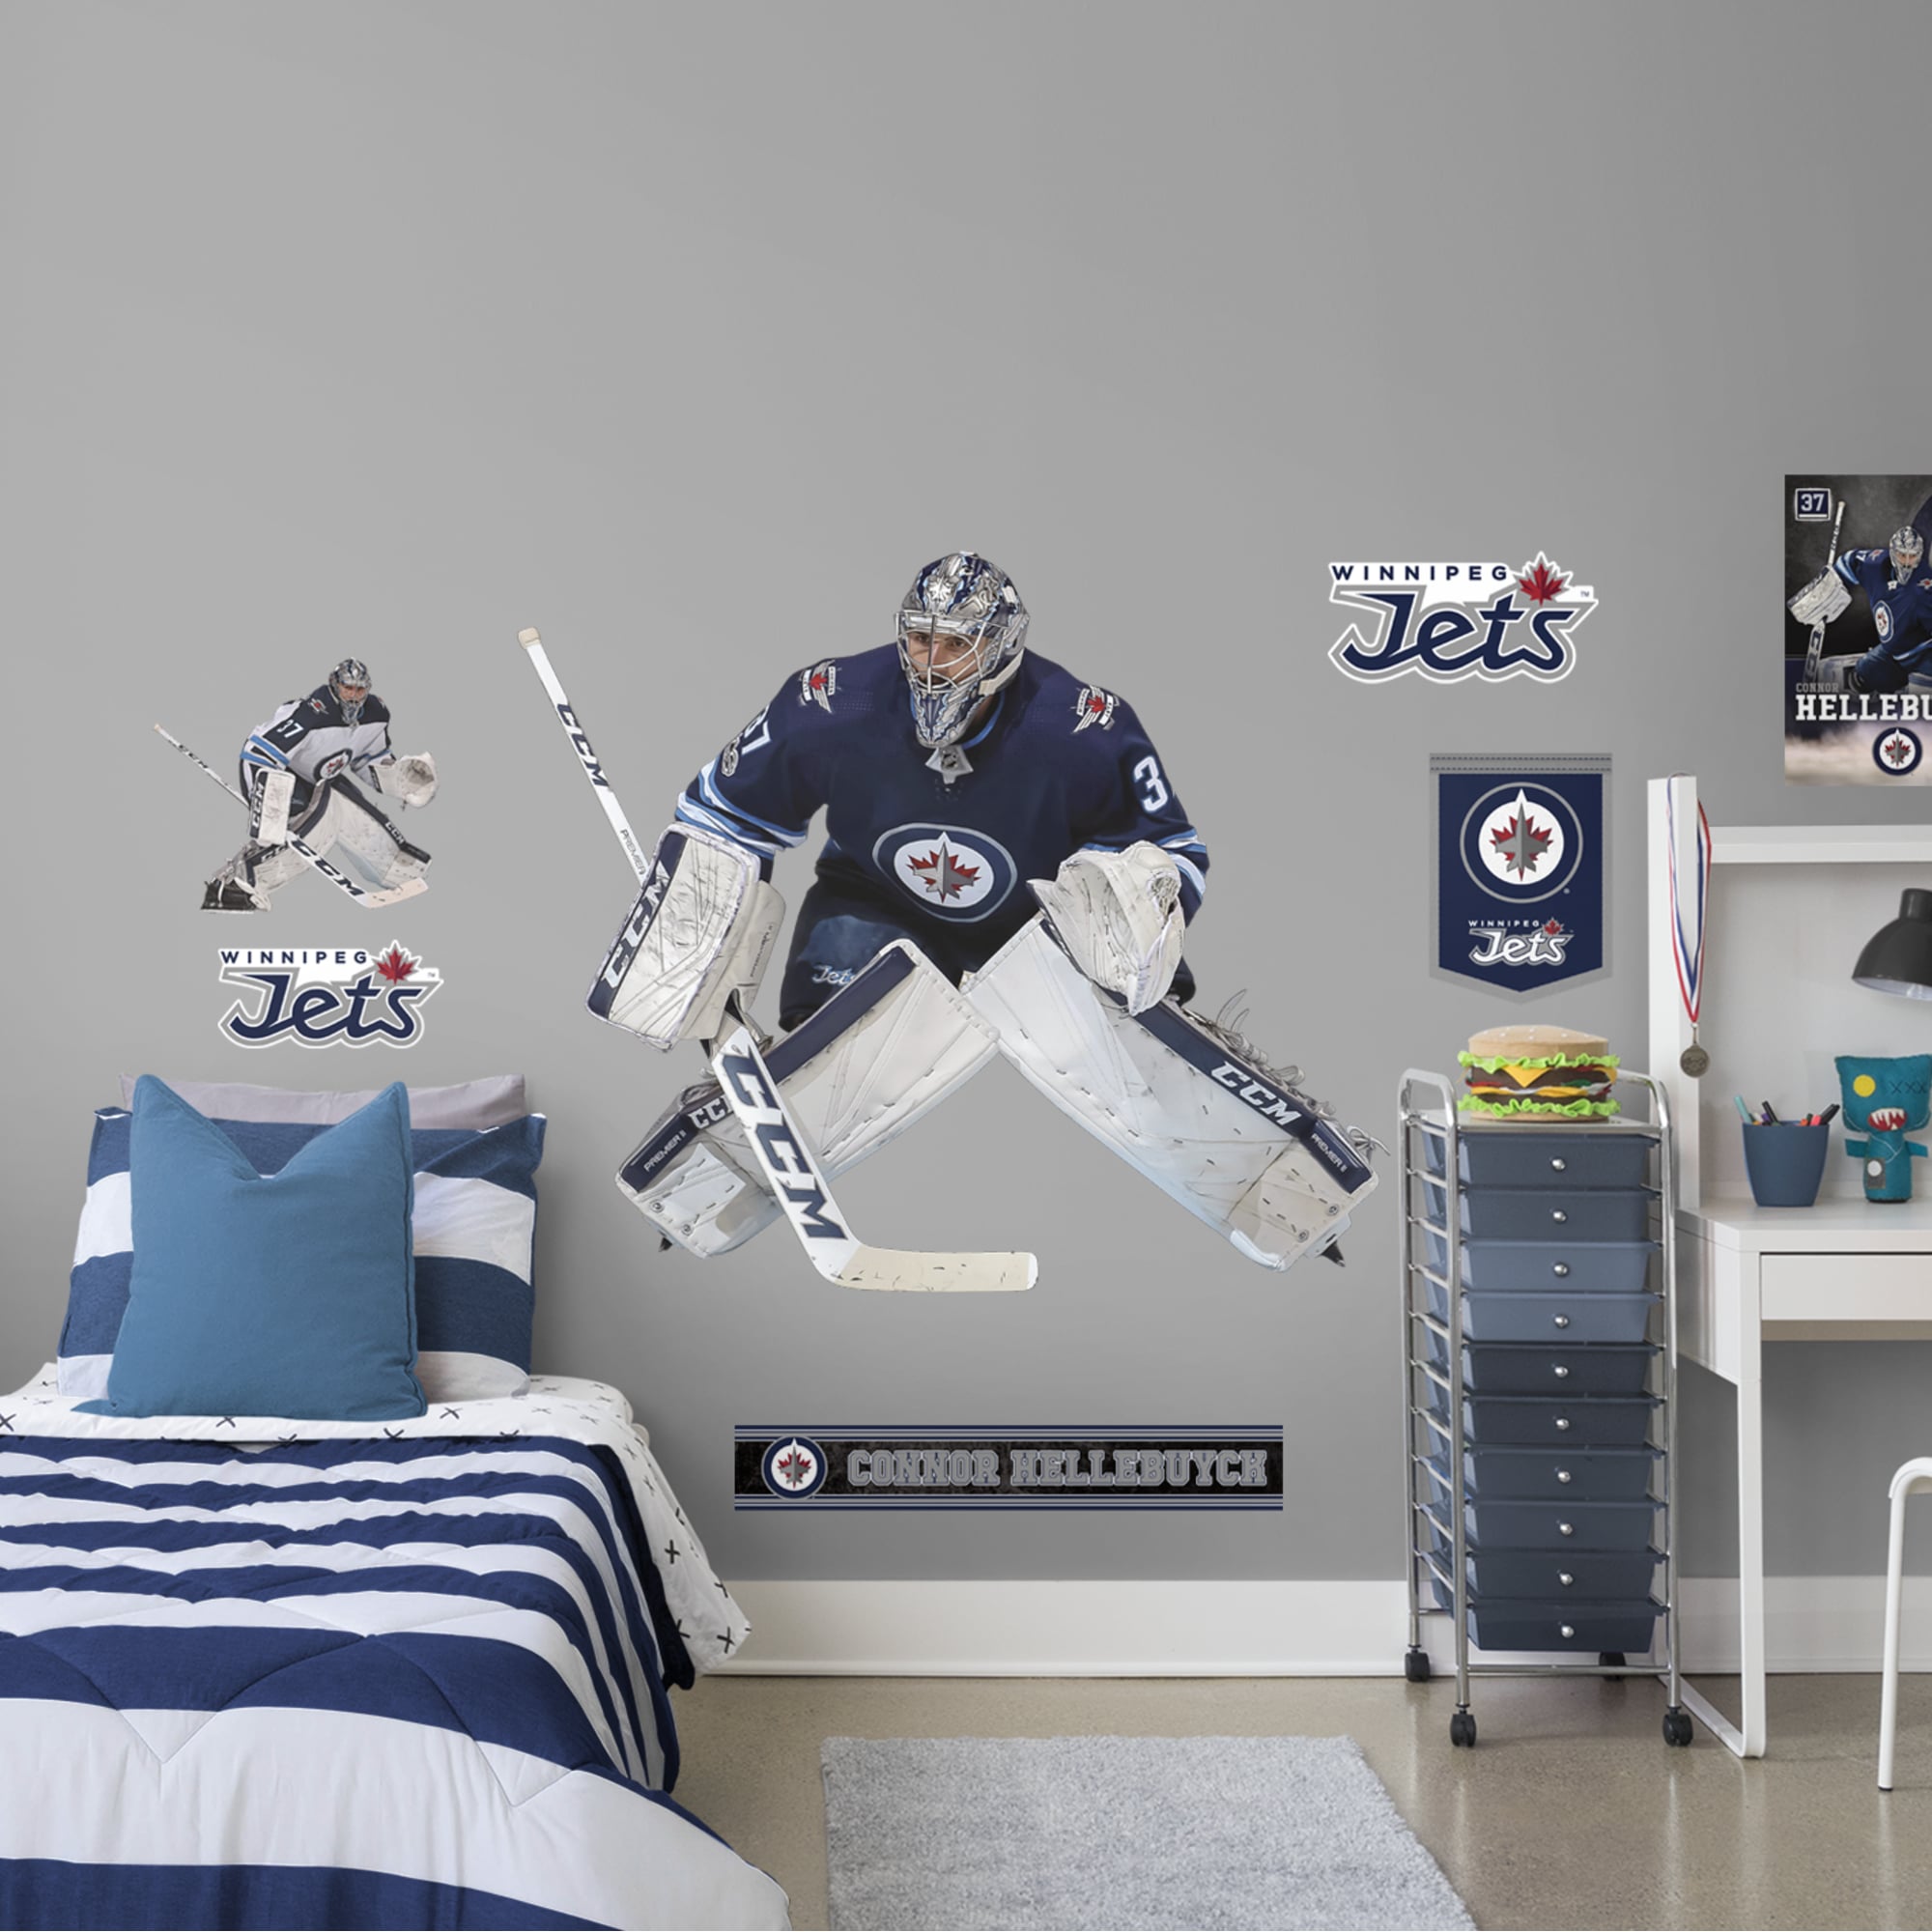 Connor Hellebuyck for Winnipeg Jets - Officially Licensed NHL Removable Wall Decal Life-Size Athlete + 11 Decals (55"W x 46"H) b